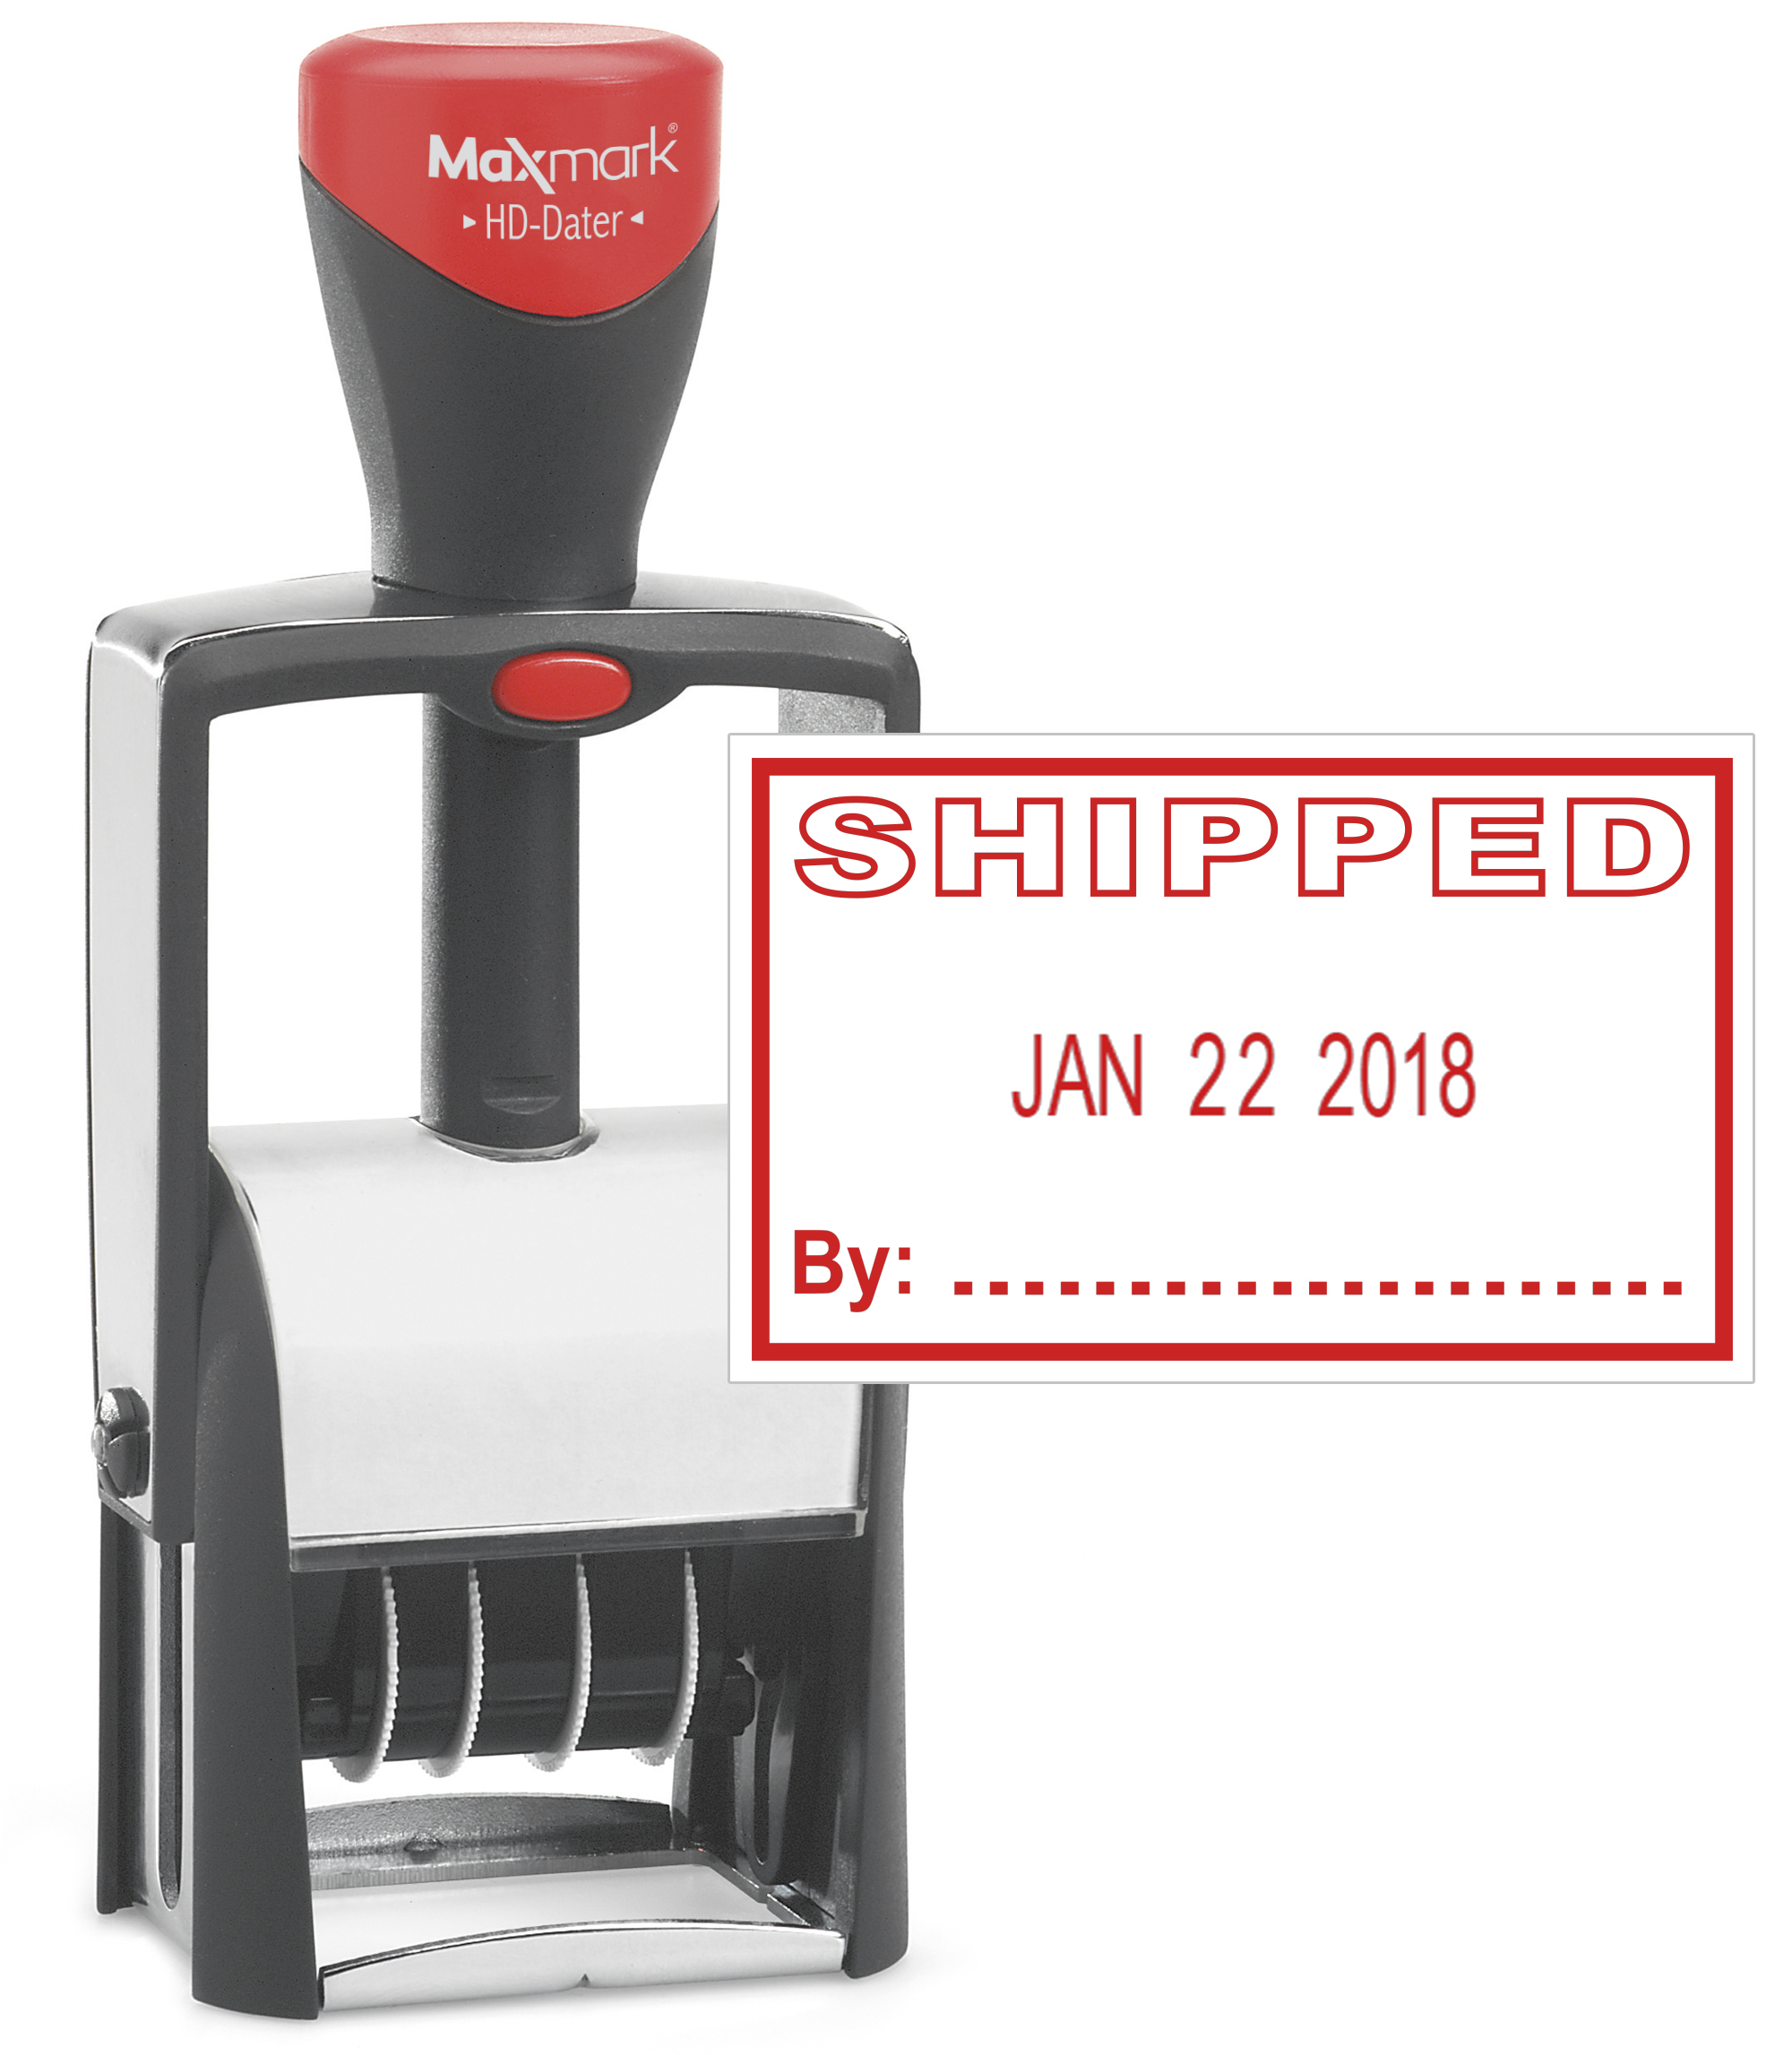 Heavy Duty Date Stamp with "SHIPPED" Self Inking Stamp - RED Ink